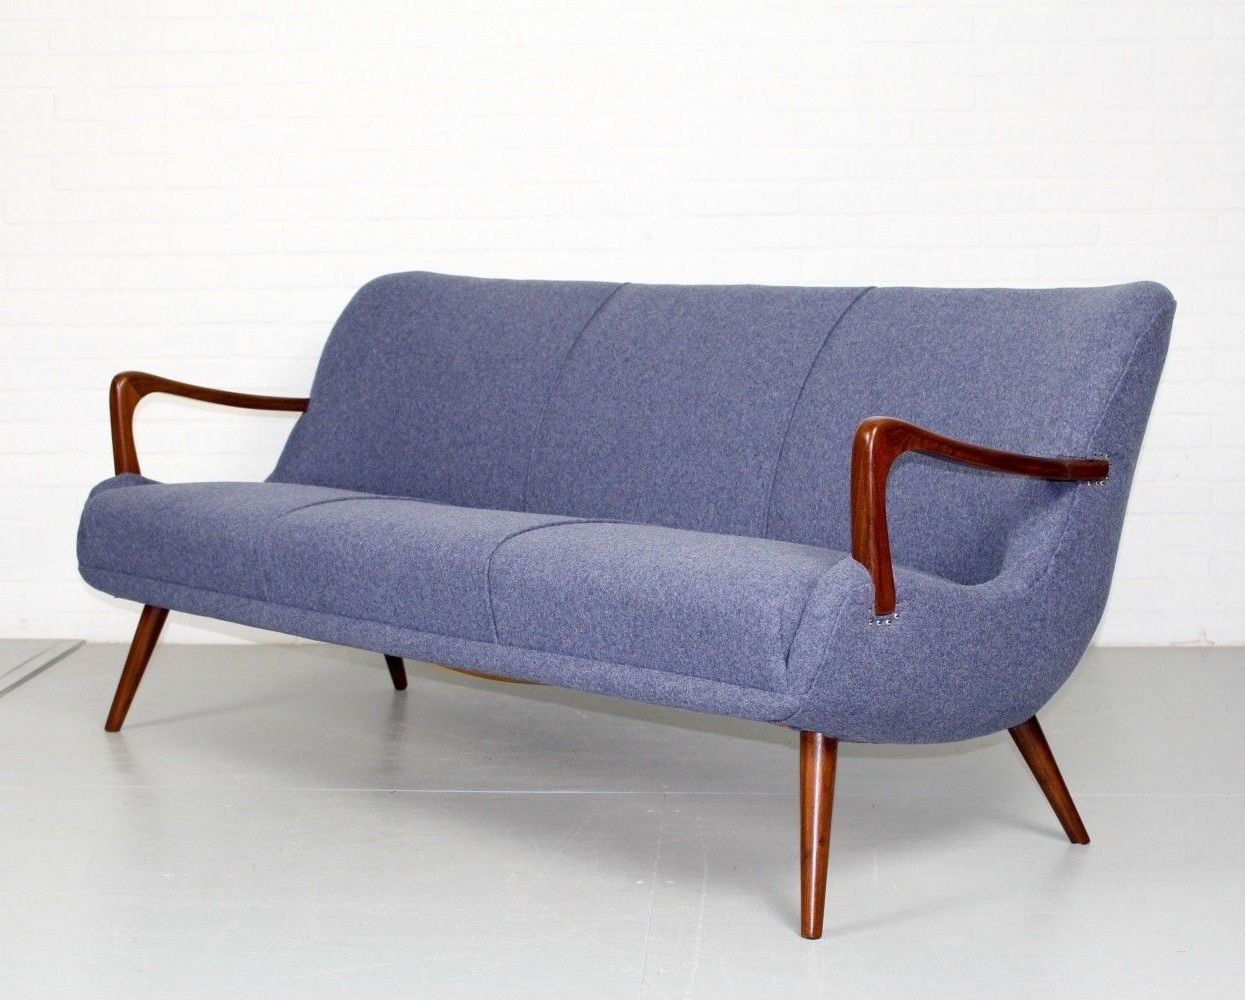 Mid Century 3 Seater Sofa With Teak Armrest & Legs, 1960s | Vintage With Mid Century 3 Seat Couches (Gallery 18 of 20)